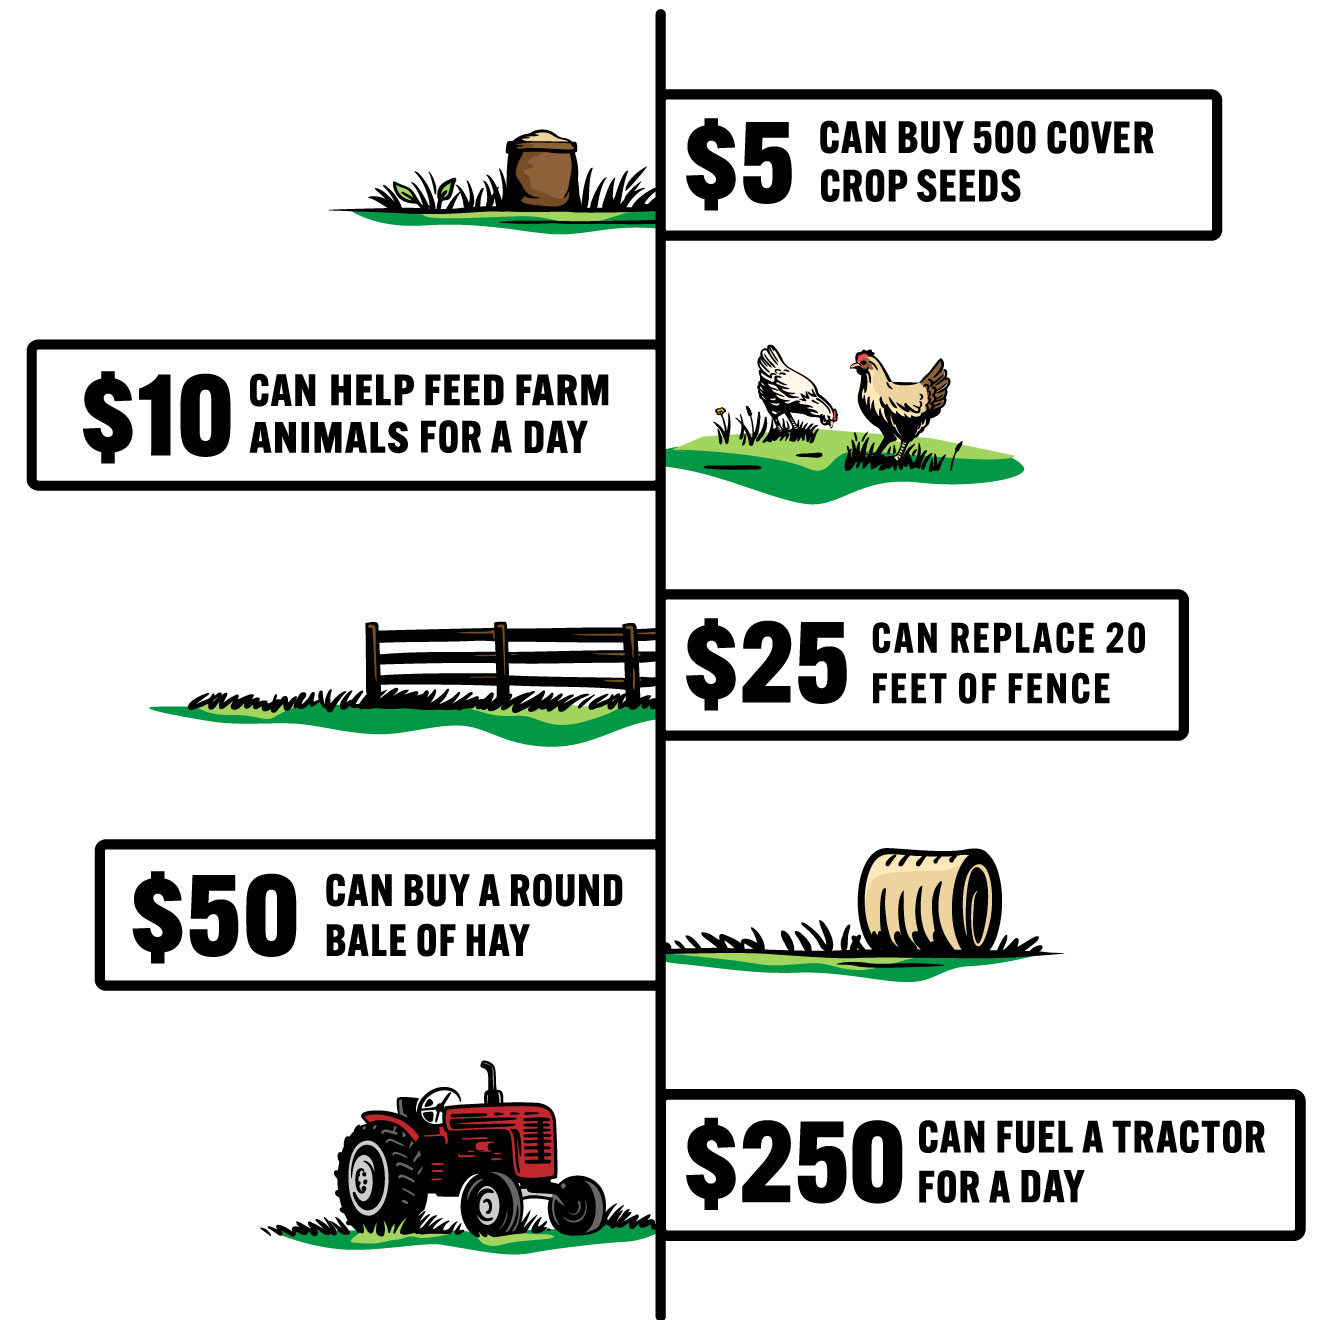 Illustration of impact of Dig Deep Donations. $5 buys 500 seeds. $50 buys a round bale of hay. $250 fuels a tractor for a day.